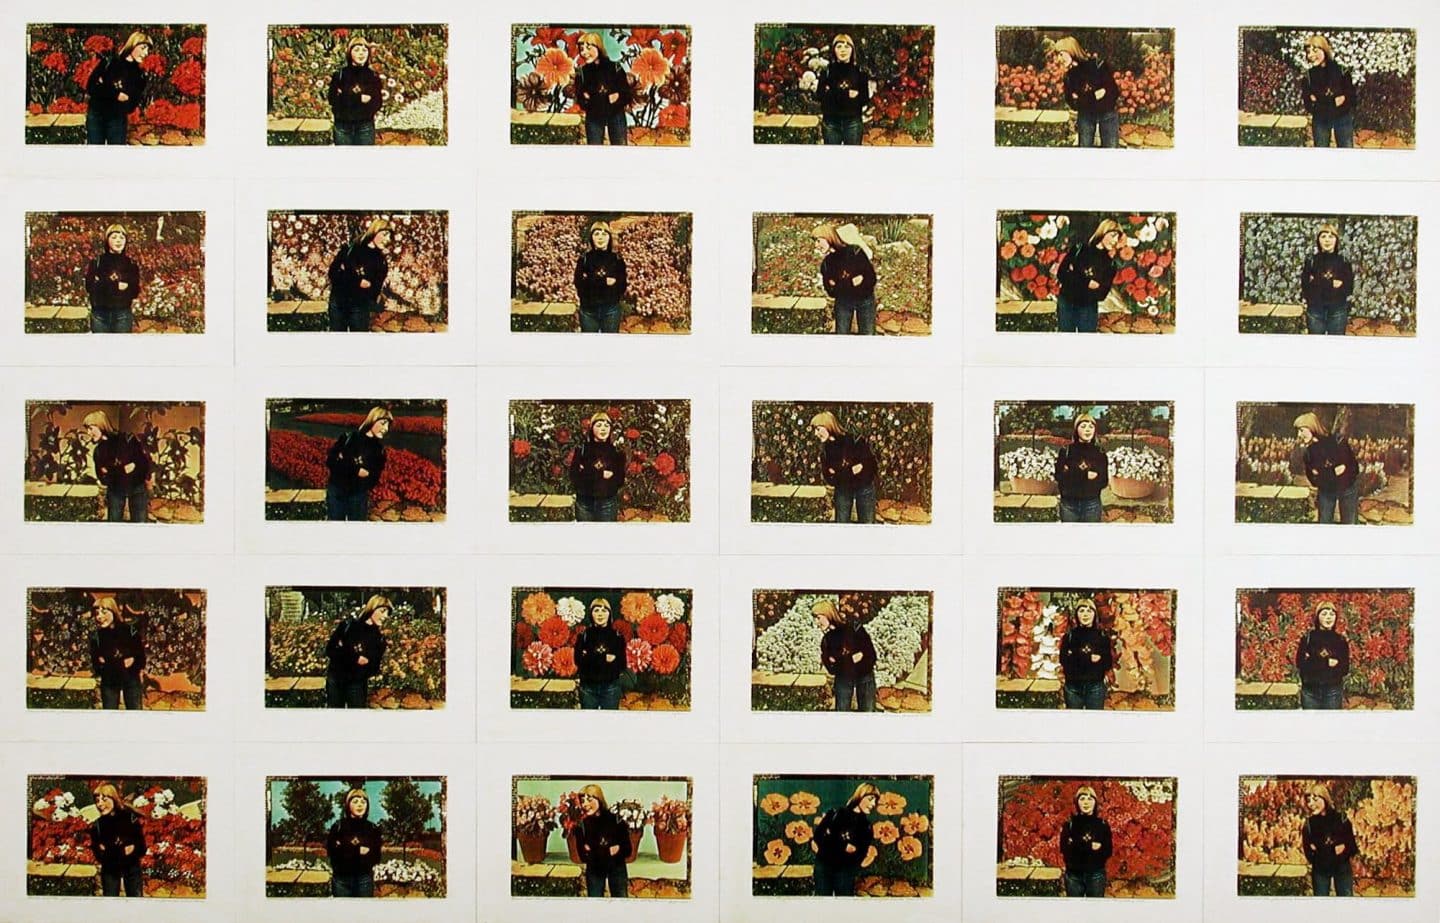 Barbara Astman, Rochester NY 1950, Connie and the Flowering Annuals, 1977, colour Xerox print on paper. Purchase, Canada Council and Gallery Association Matching Grant, 1977 (20-085) Photo: Agnes Etherington Art Centre